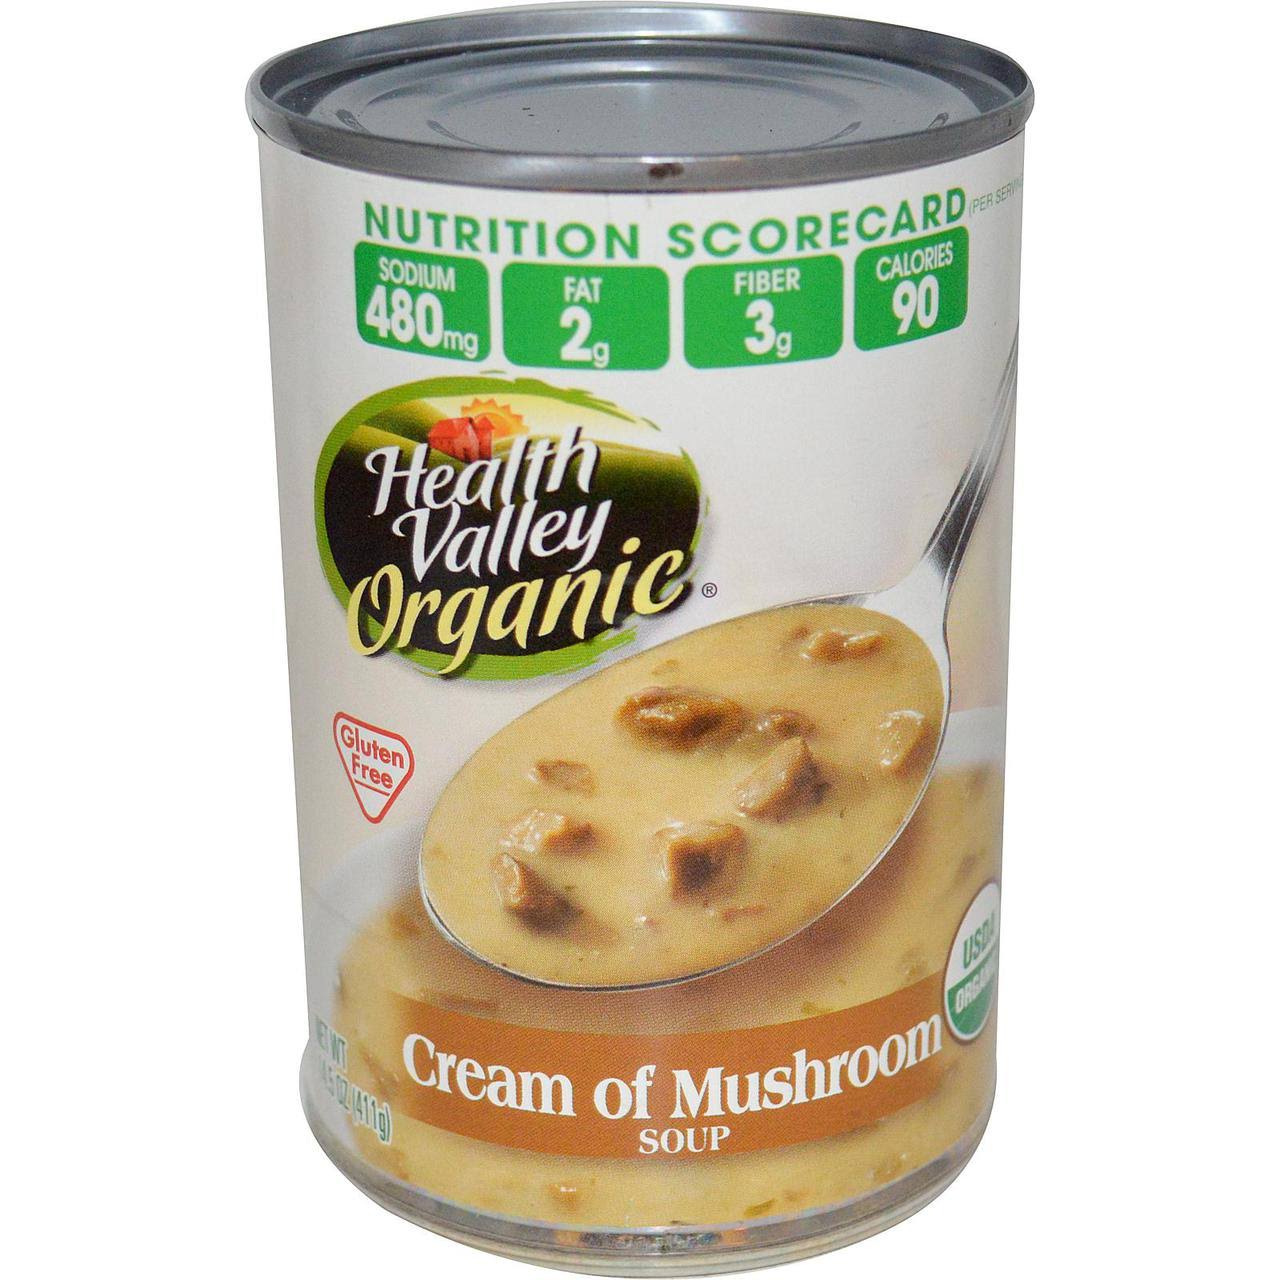 Health Valley Organic Soup, Cream of Mushroom, 14.5 Ounce (Pack of 12)